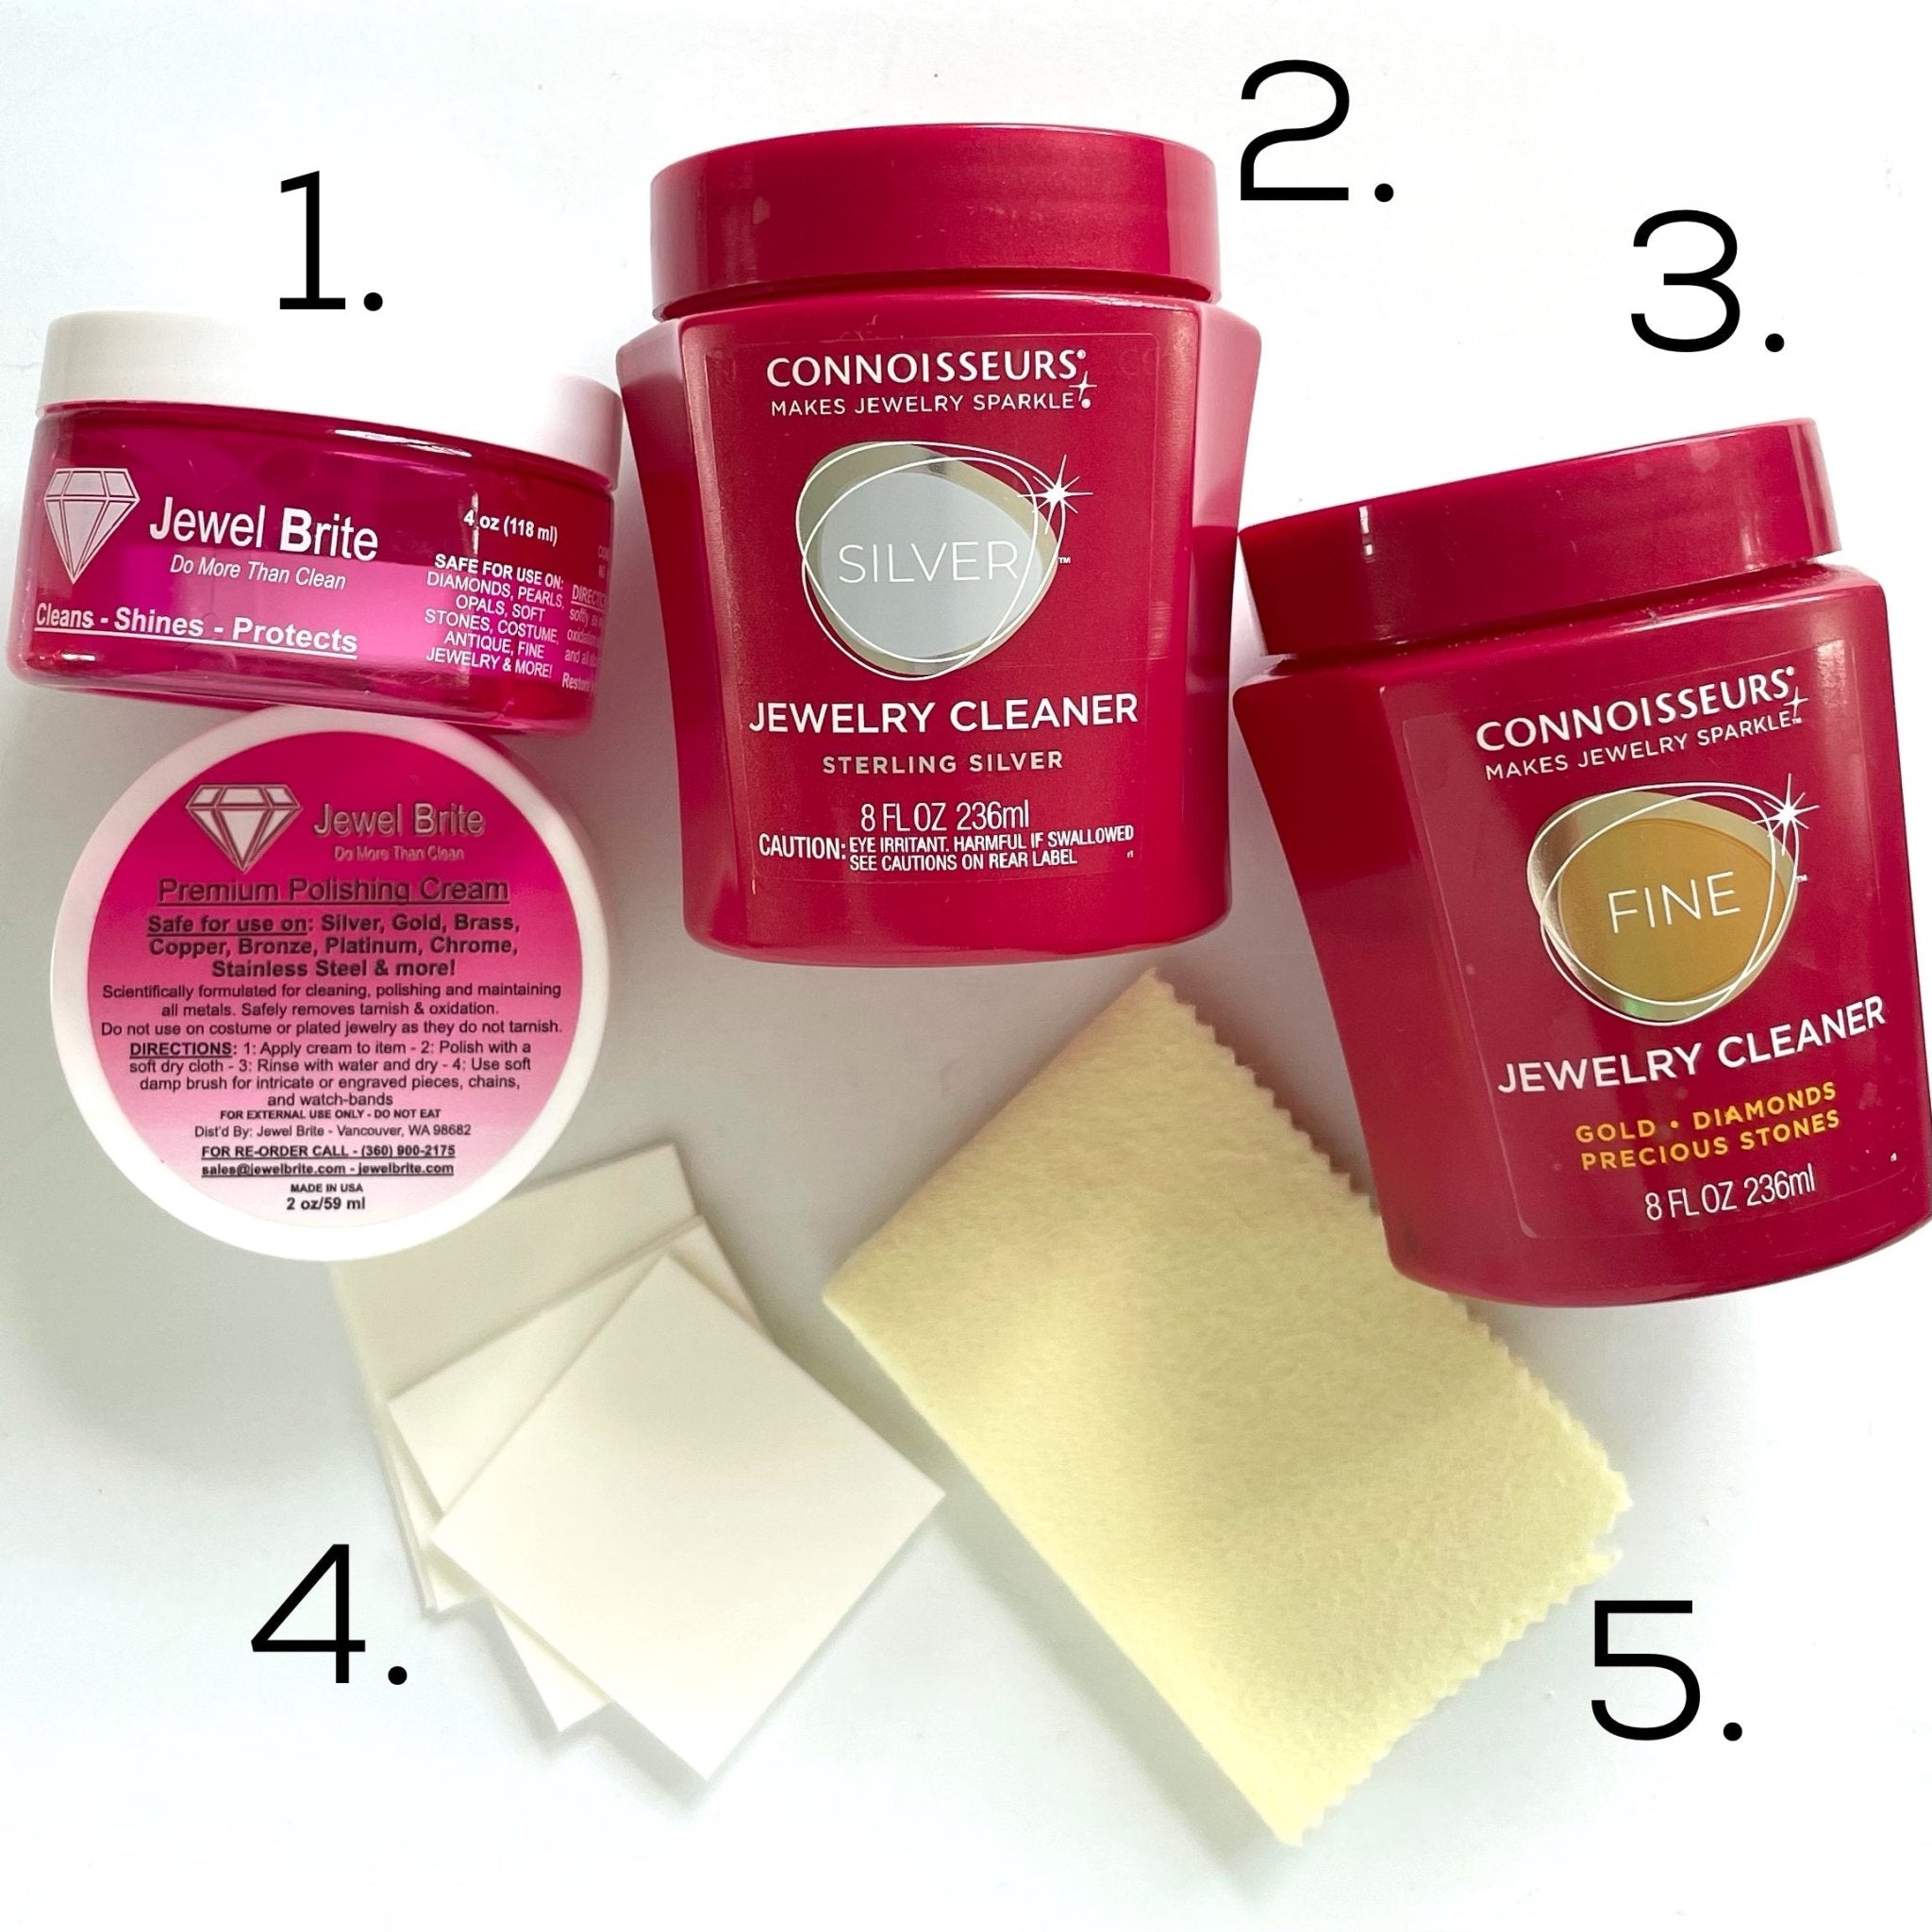 Connoisseurs Gold Jewelry Polishing Cloth, Does it Work? 